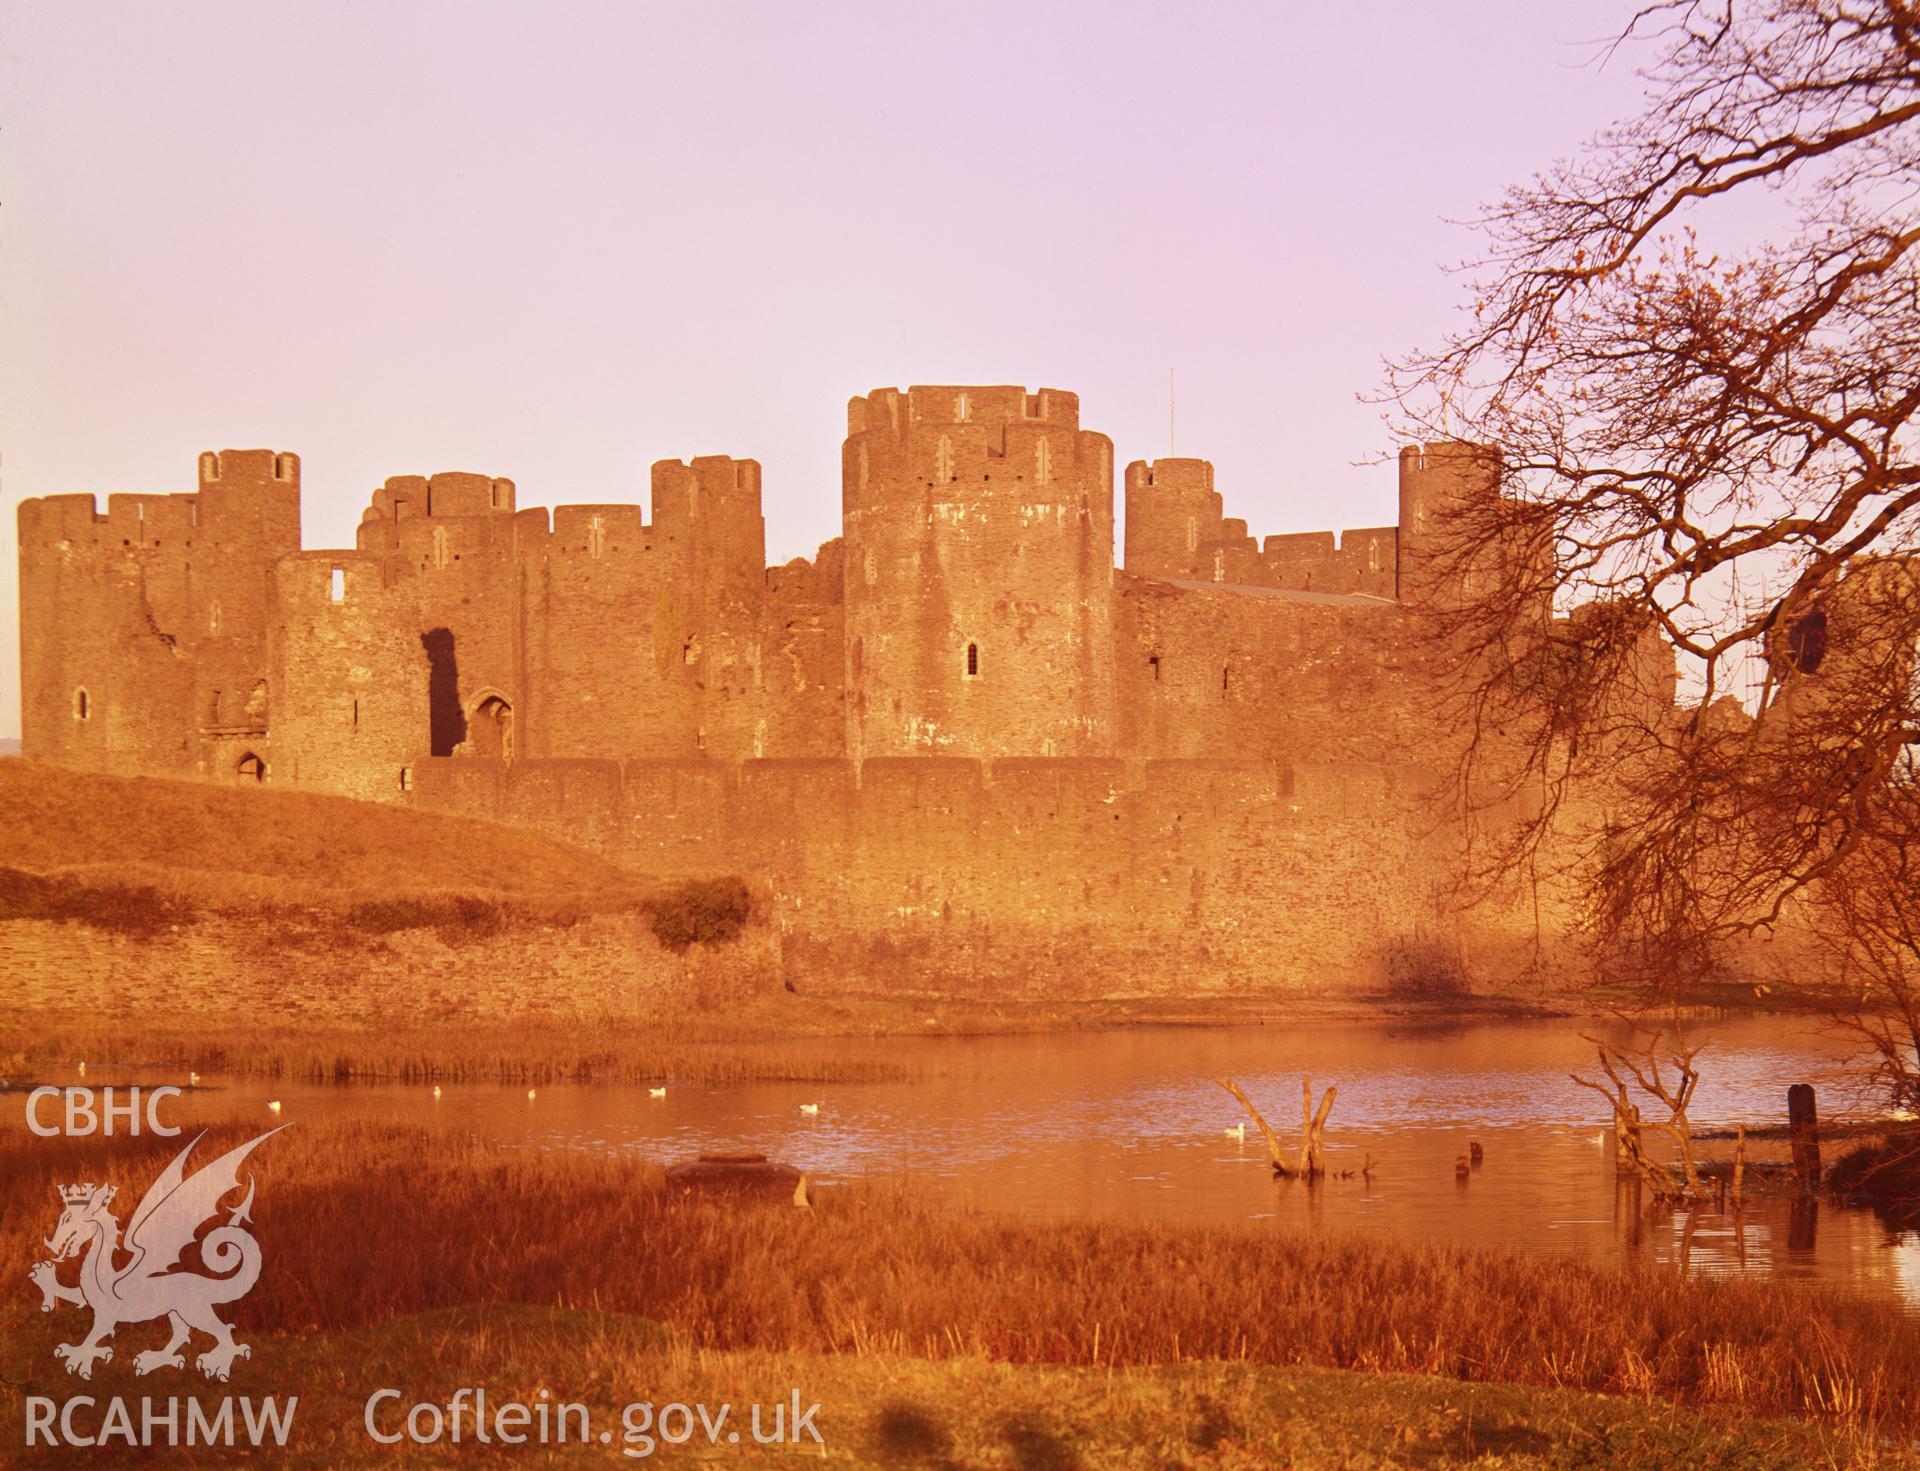 RCAHMW colour transparency showing Caerphilly Castle taken by RCAHMW , c.1980